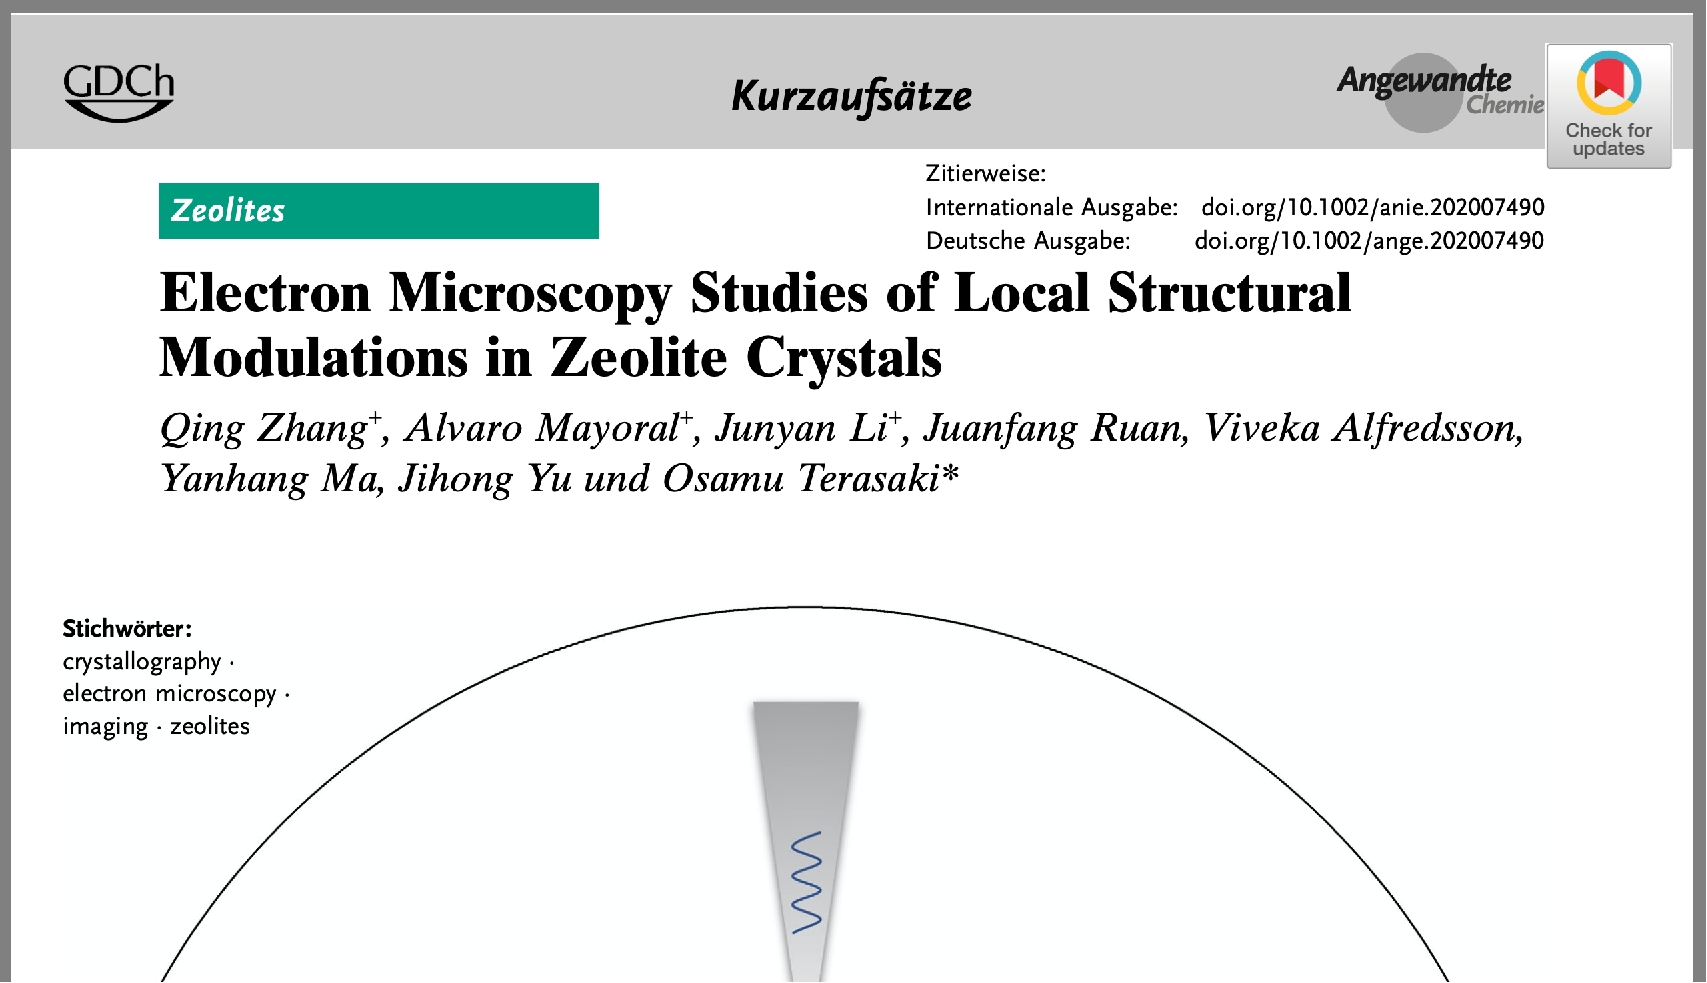 Electron microscopy studies of local structural modulations in zeolite crystals